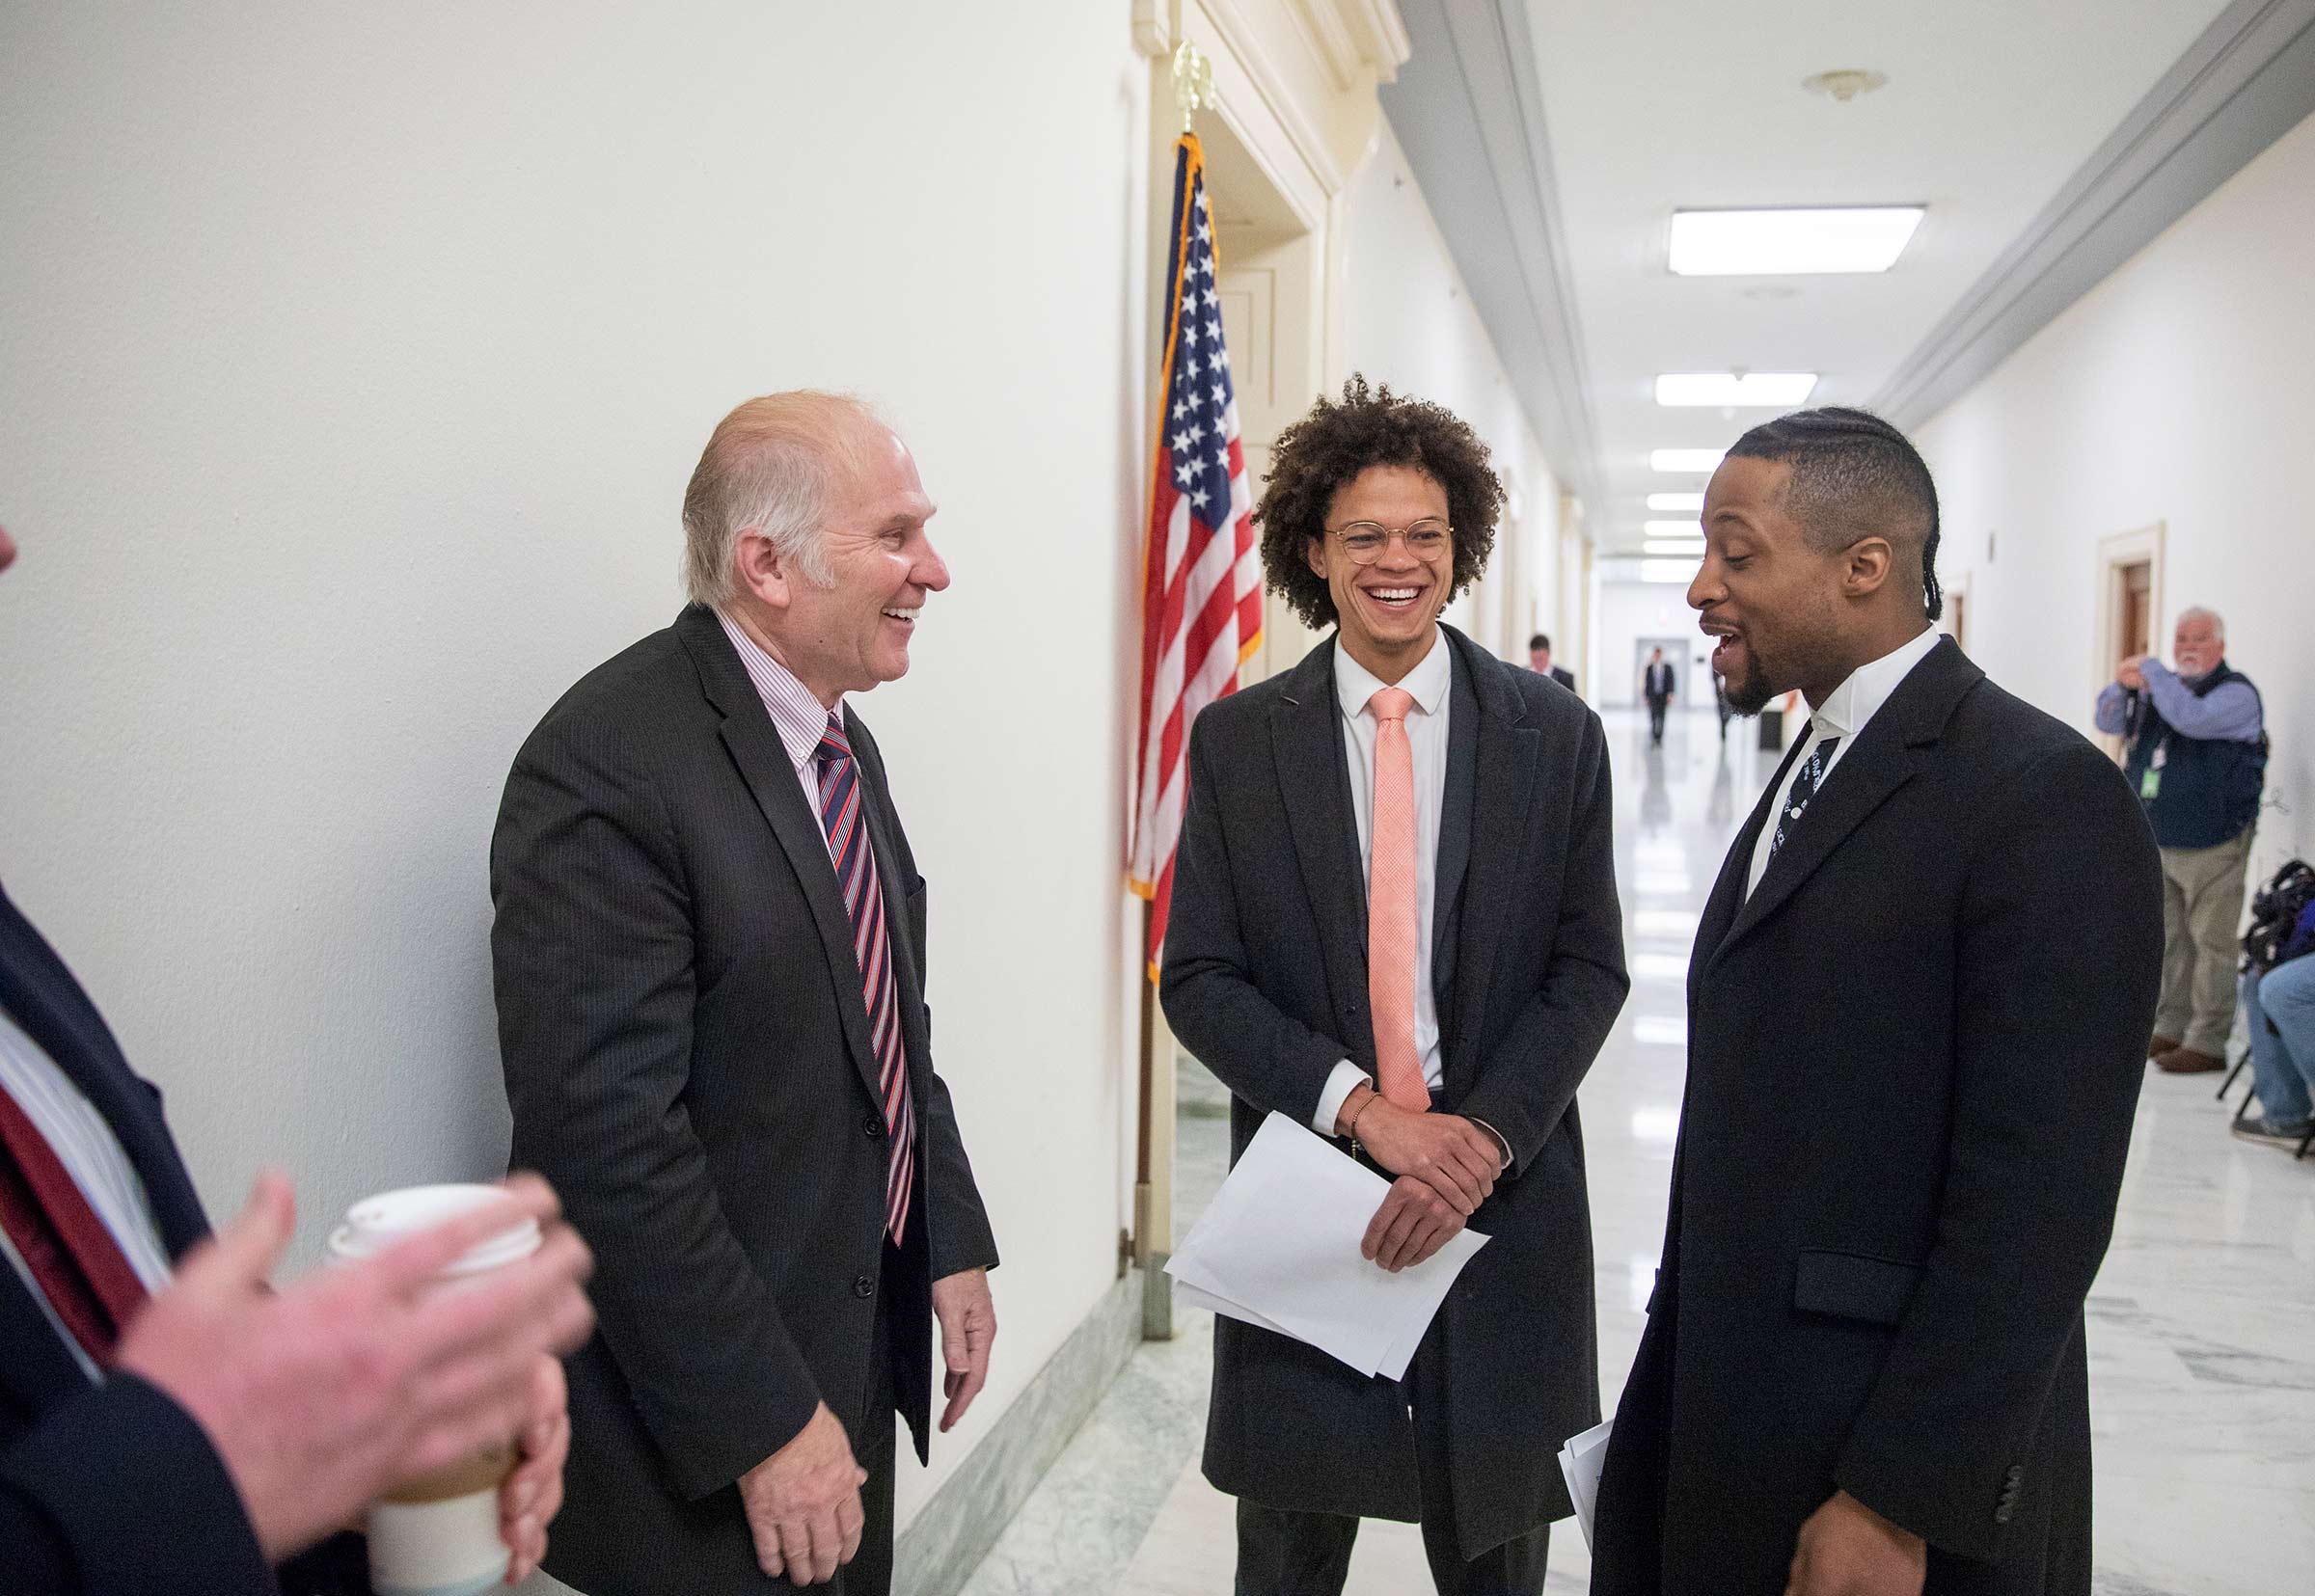 Two entrepreneurs of color wearing suits and ties talk with a white politician, also wearing a suit and tie, in a brightly-lit hallway, an American flag hanging behind them.